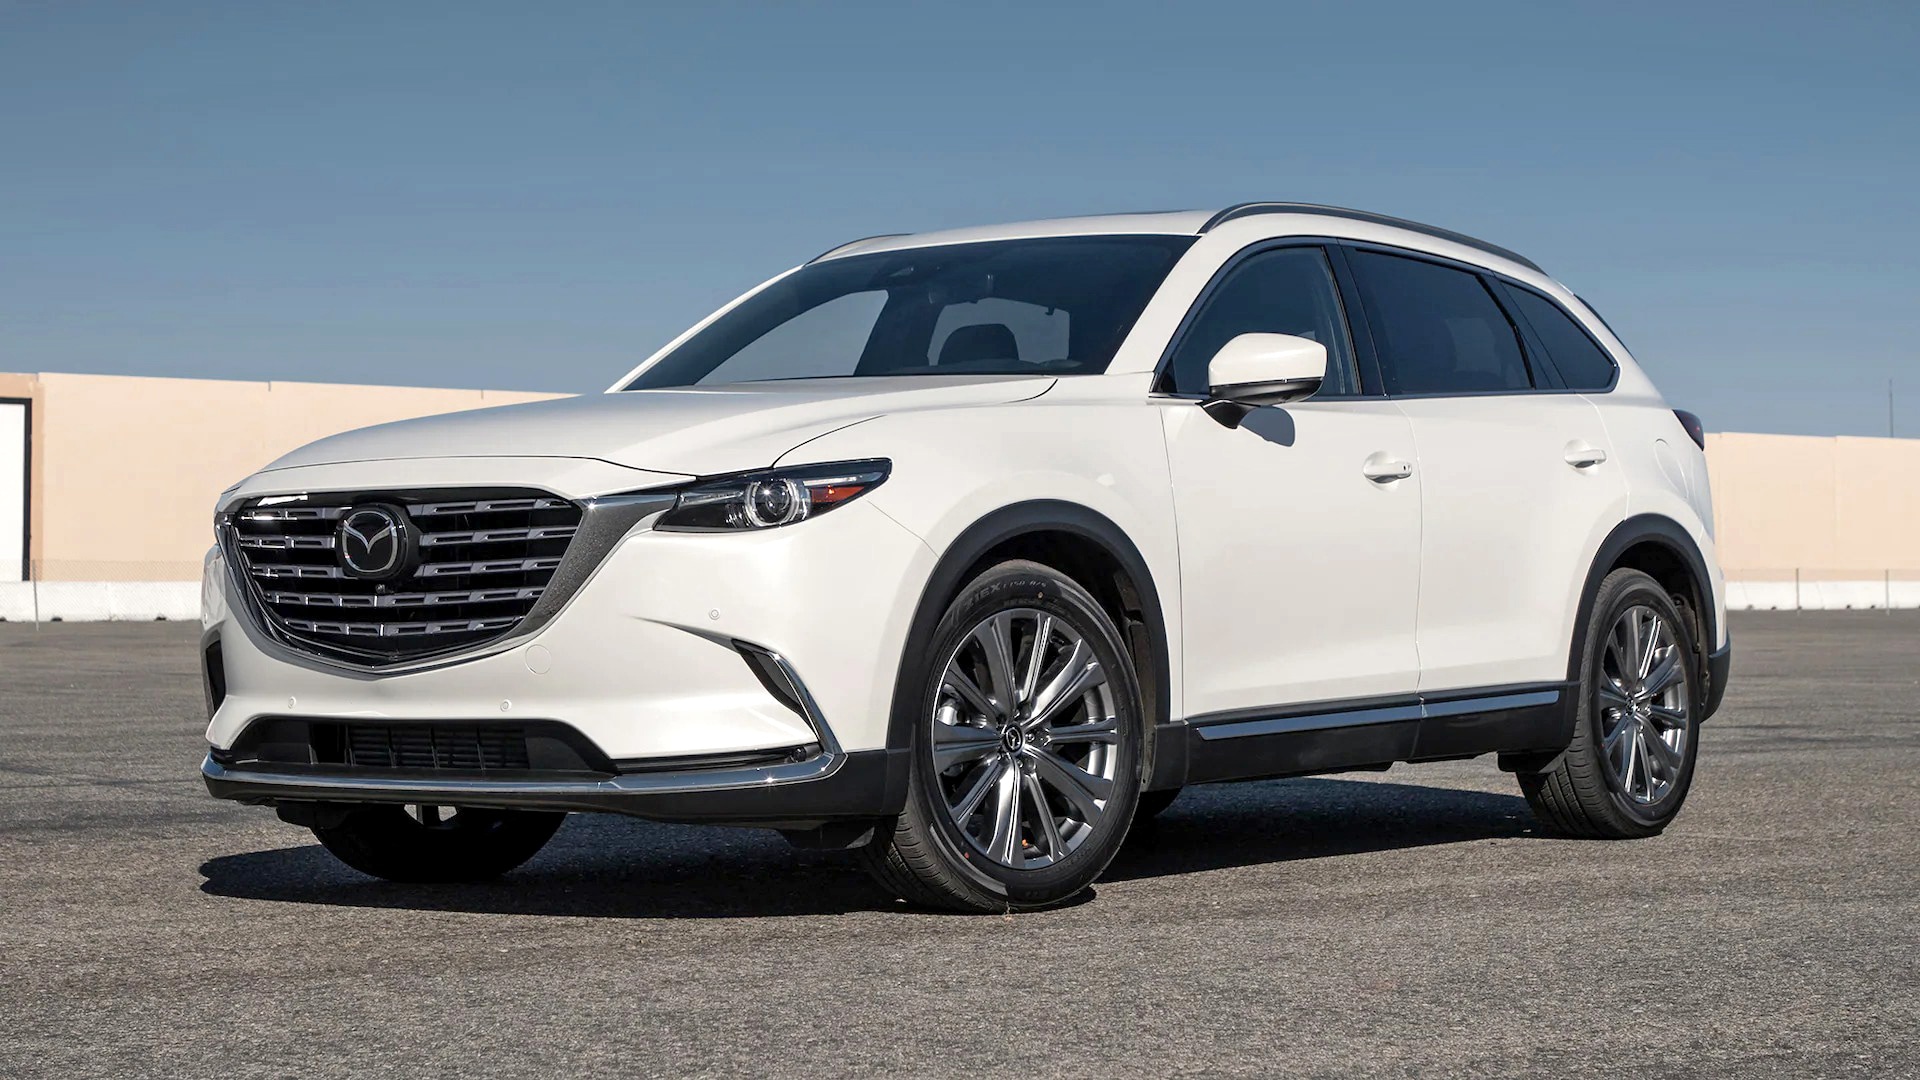 2023 Mazda CX-9 Prices, Reviews, and Photos - MotorTrend